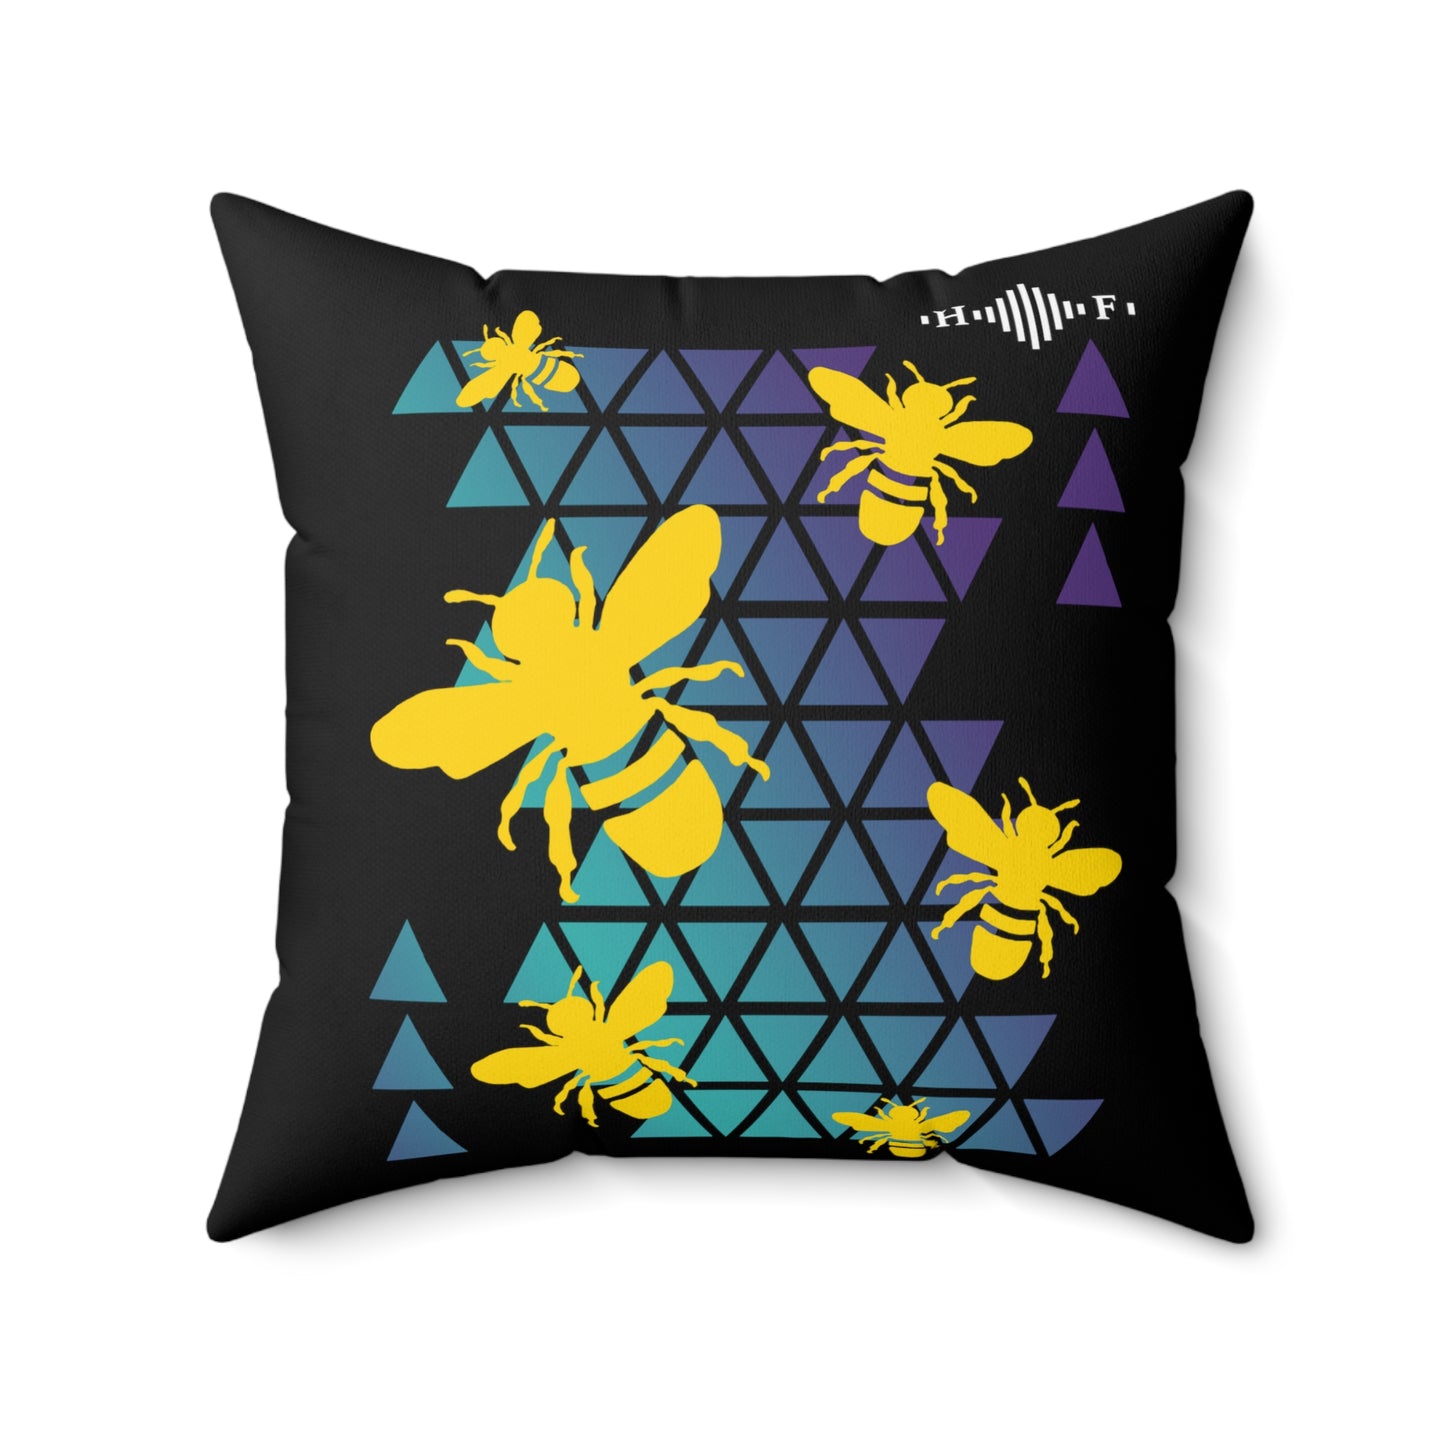 Golden Bees - Square Pillow